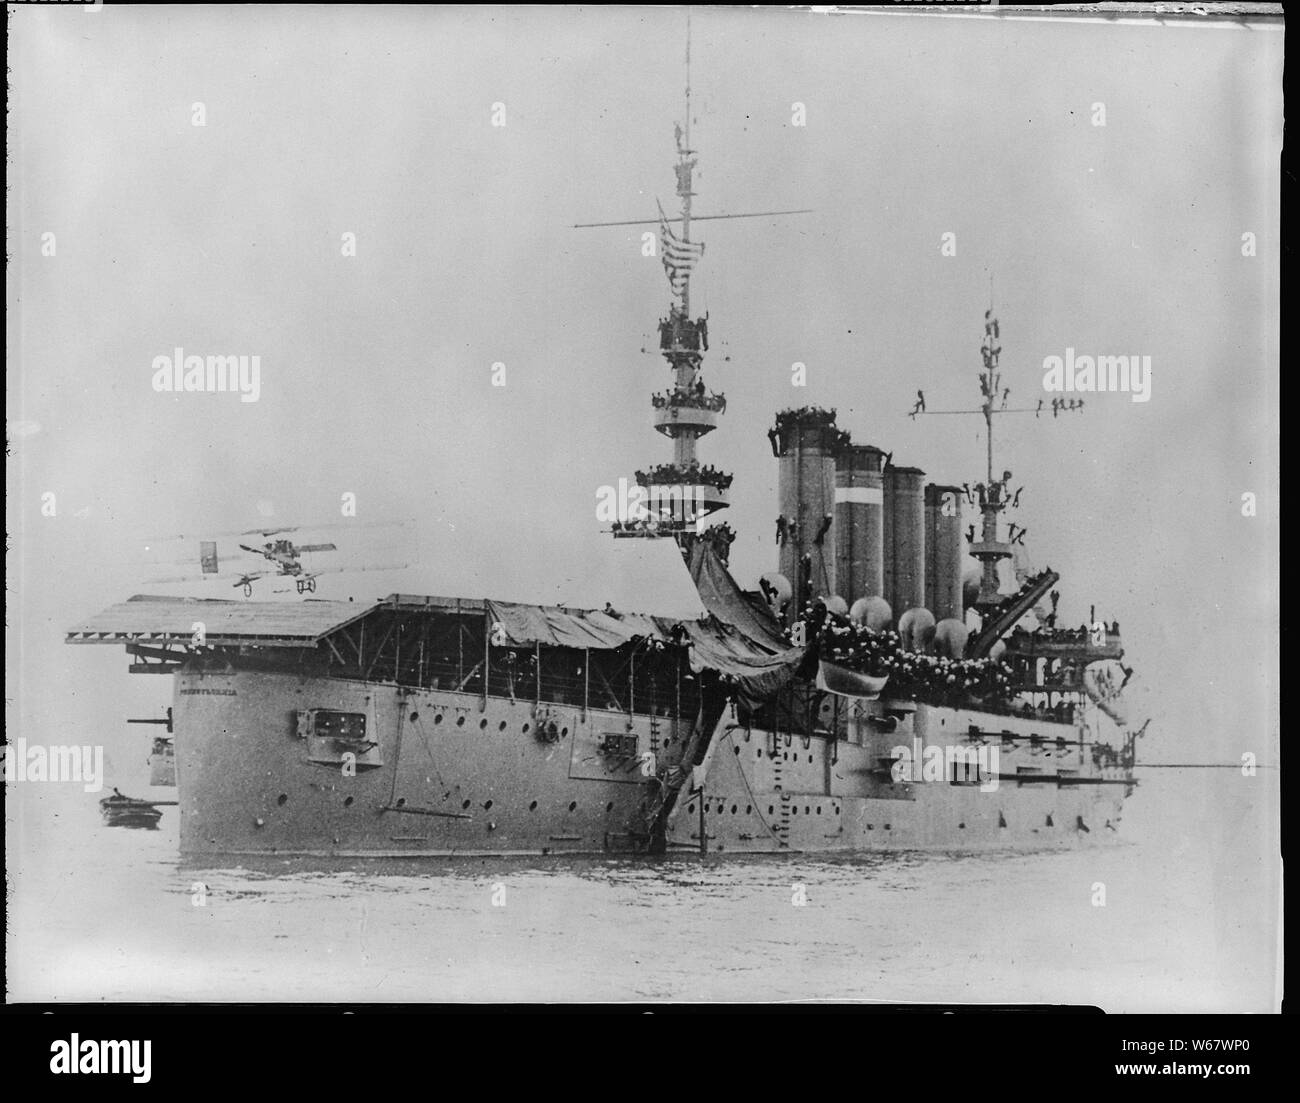 Pennsylvania (Armored Cruiser 4), starboard stern quarter with Eugene P. Ely landing plane on flight deck, 01/18/1911; Scope and content:  The Pennsylvania (Armored Cruiser 4), renamed the Pittsburgh in 1912. Starboard stern quarter with Eugene P. Ely landing plane on flight deck. Stock Photo